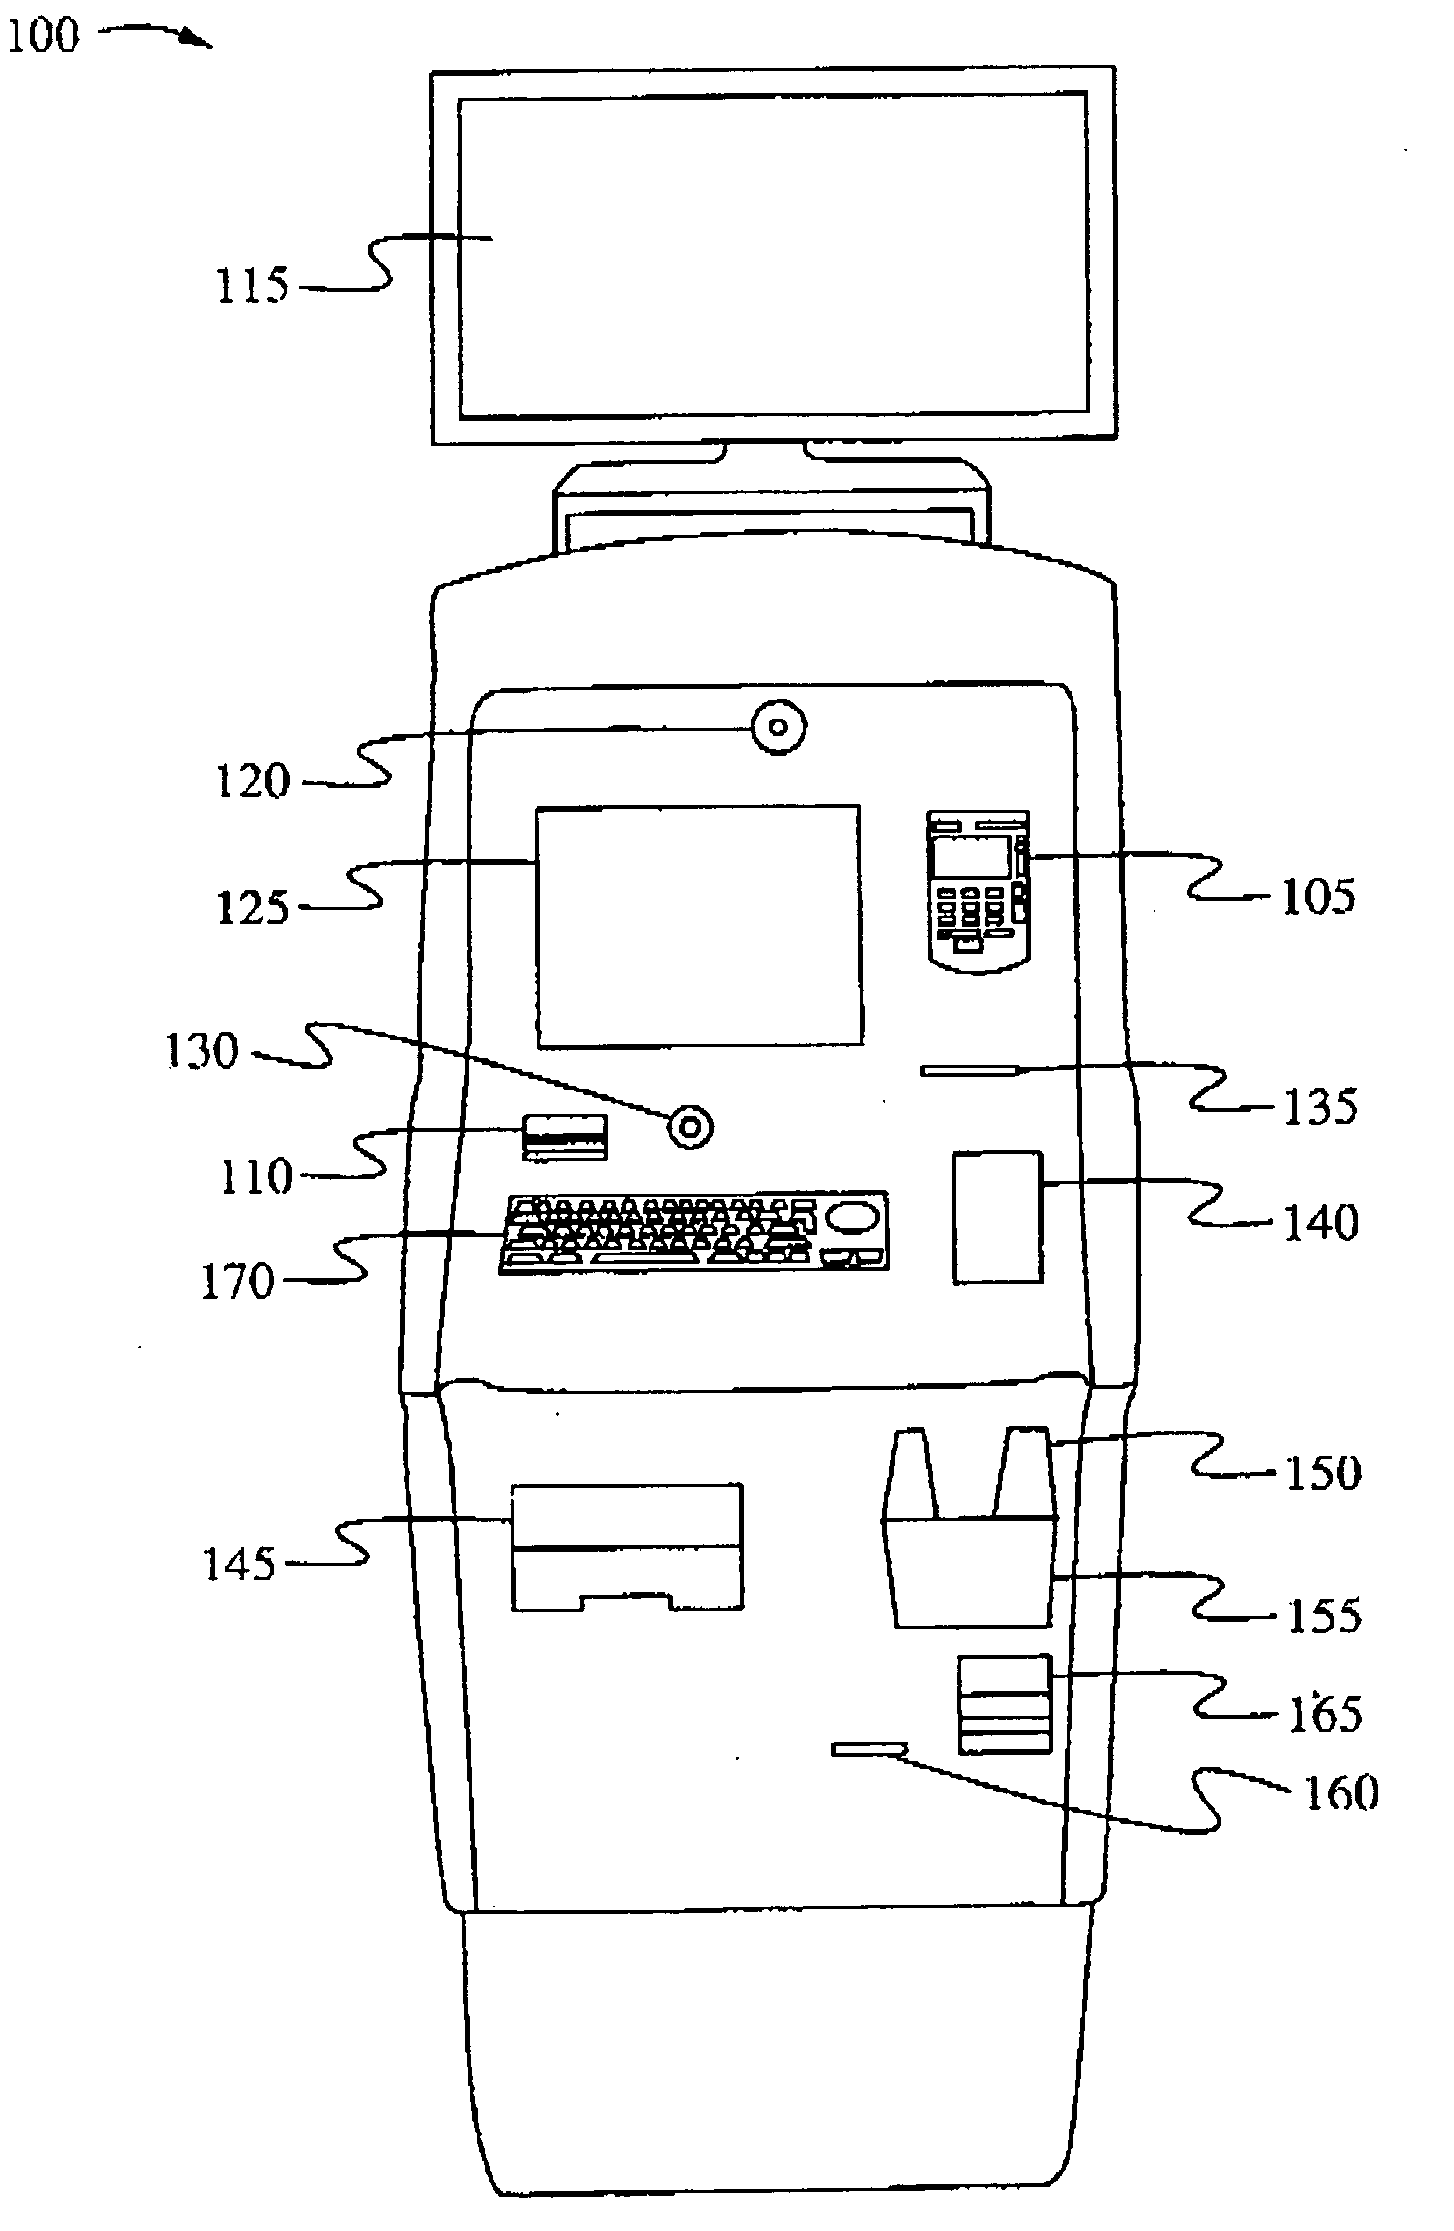 Apparatus and method of performing financial business transactions